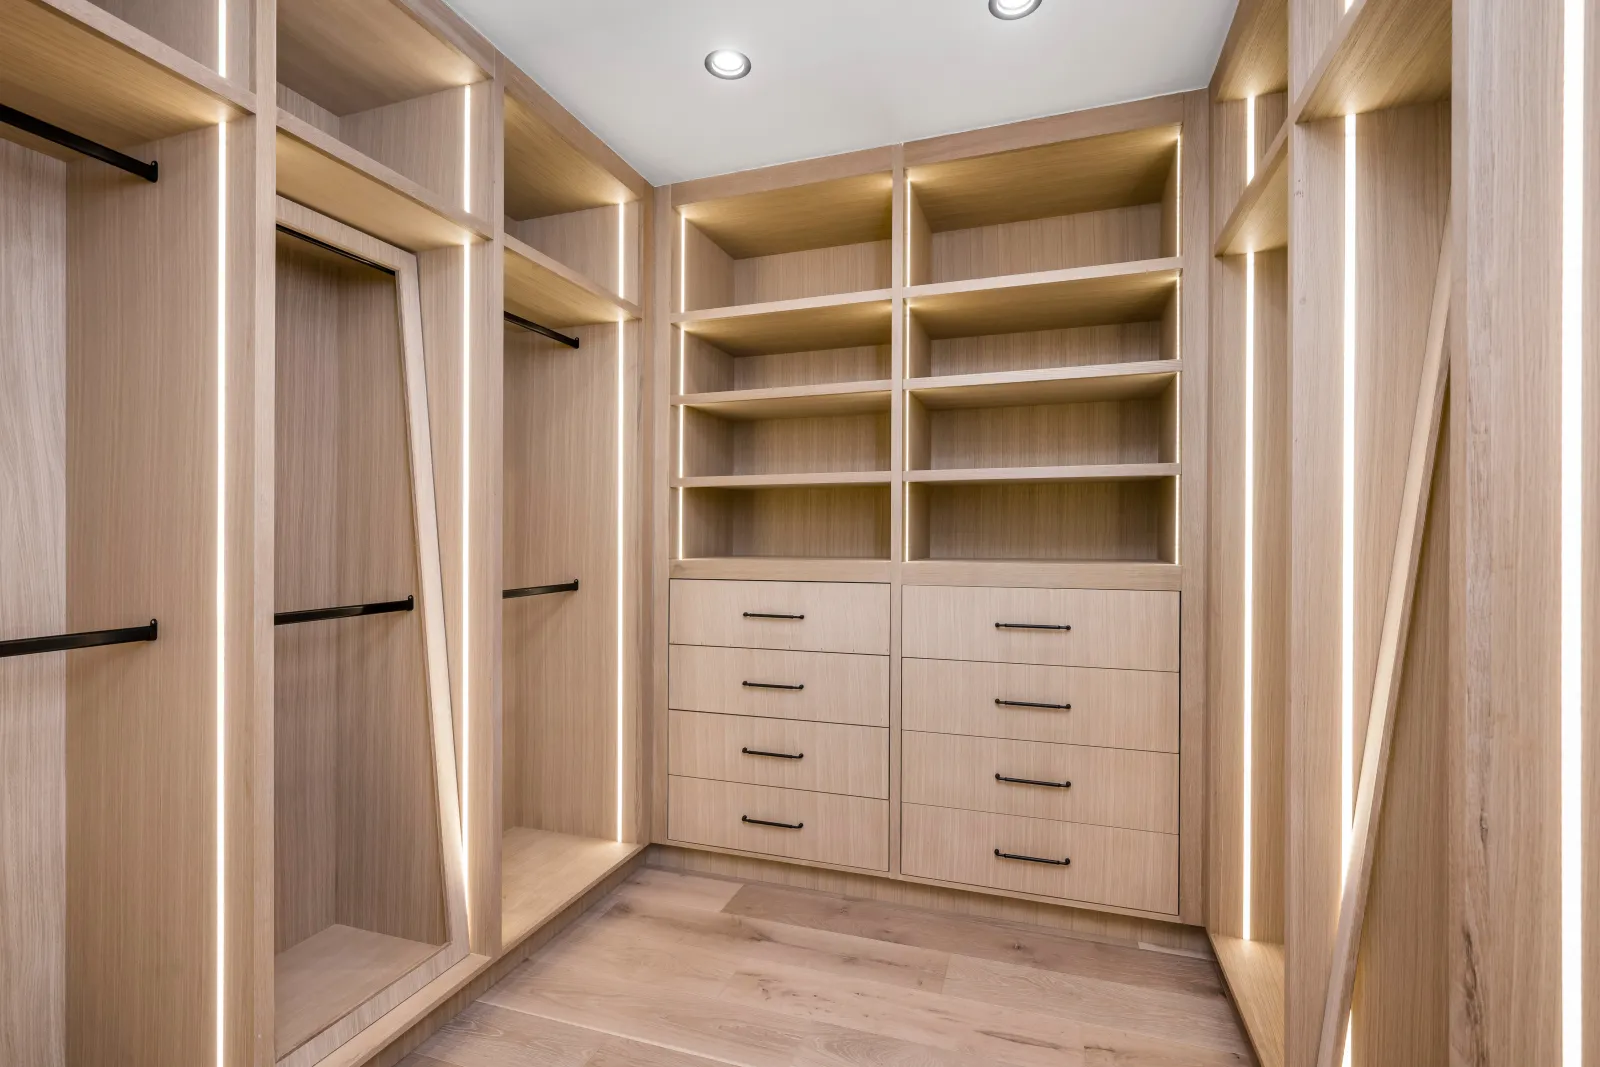 How Much Does a Custom Closet Cost?